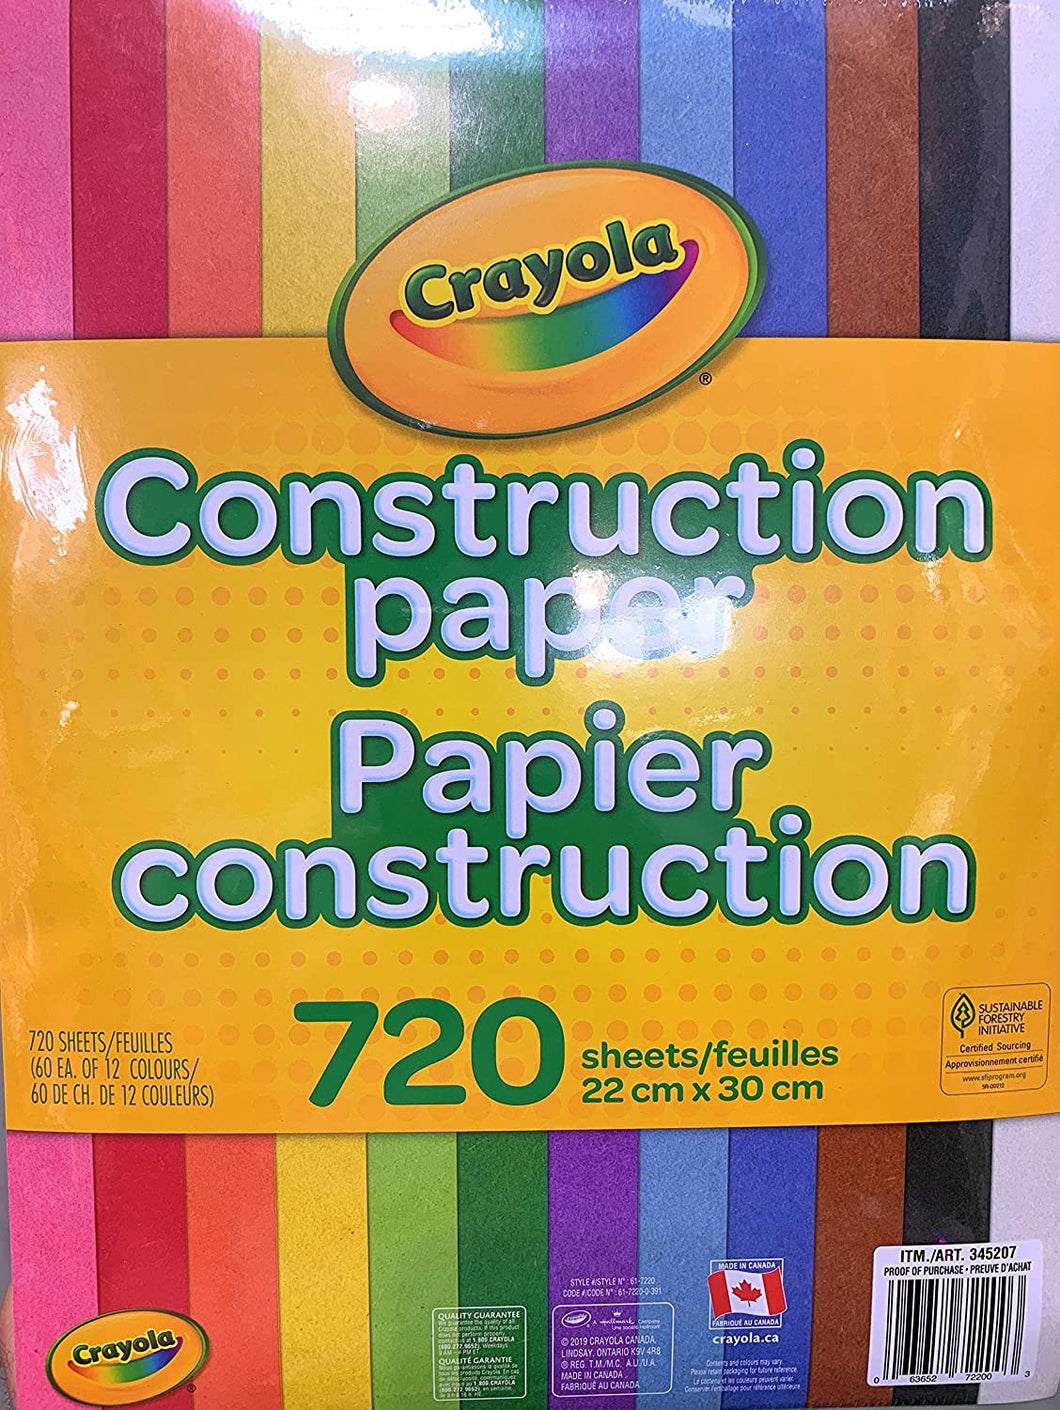 Ezyaid Construction Paper Circles with Assorted Colors 6 Inch Colored Craft  Paper 200 Sheets for Kids Arts and Crafts School Crafting Supplies for Kids  6 inches